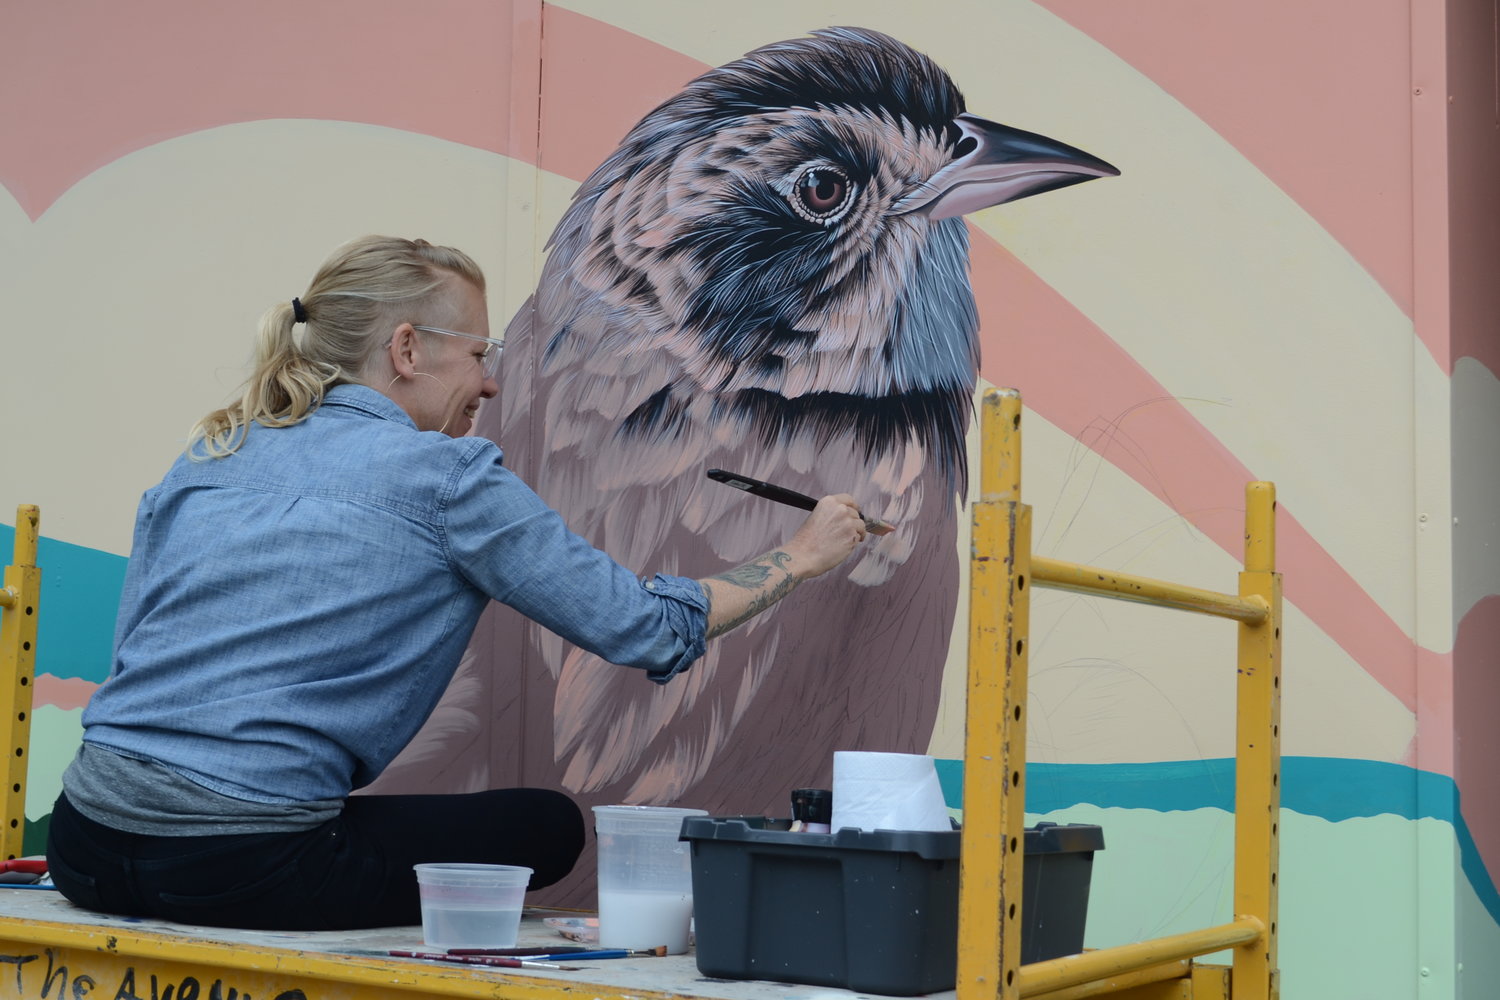 Josie Morway, a Boston-based artist and former Rhode Island resident, in the process of painting a finely-detailed saltmarsh sparrow on a storefront at 24 Child St. It is part of a mural commissioned by the Town in partnership with The Avenue Concept designed to bring awareness to the increasing concern over climate change and sea level rise.